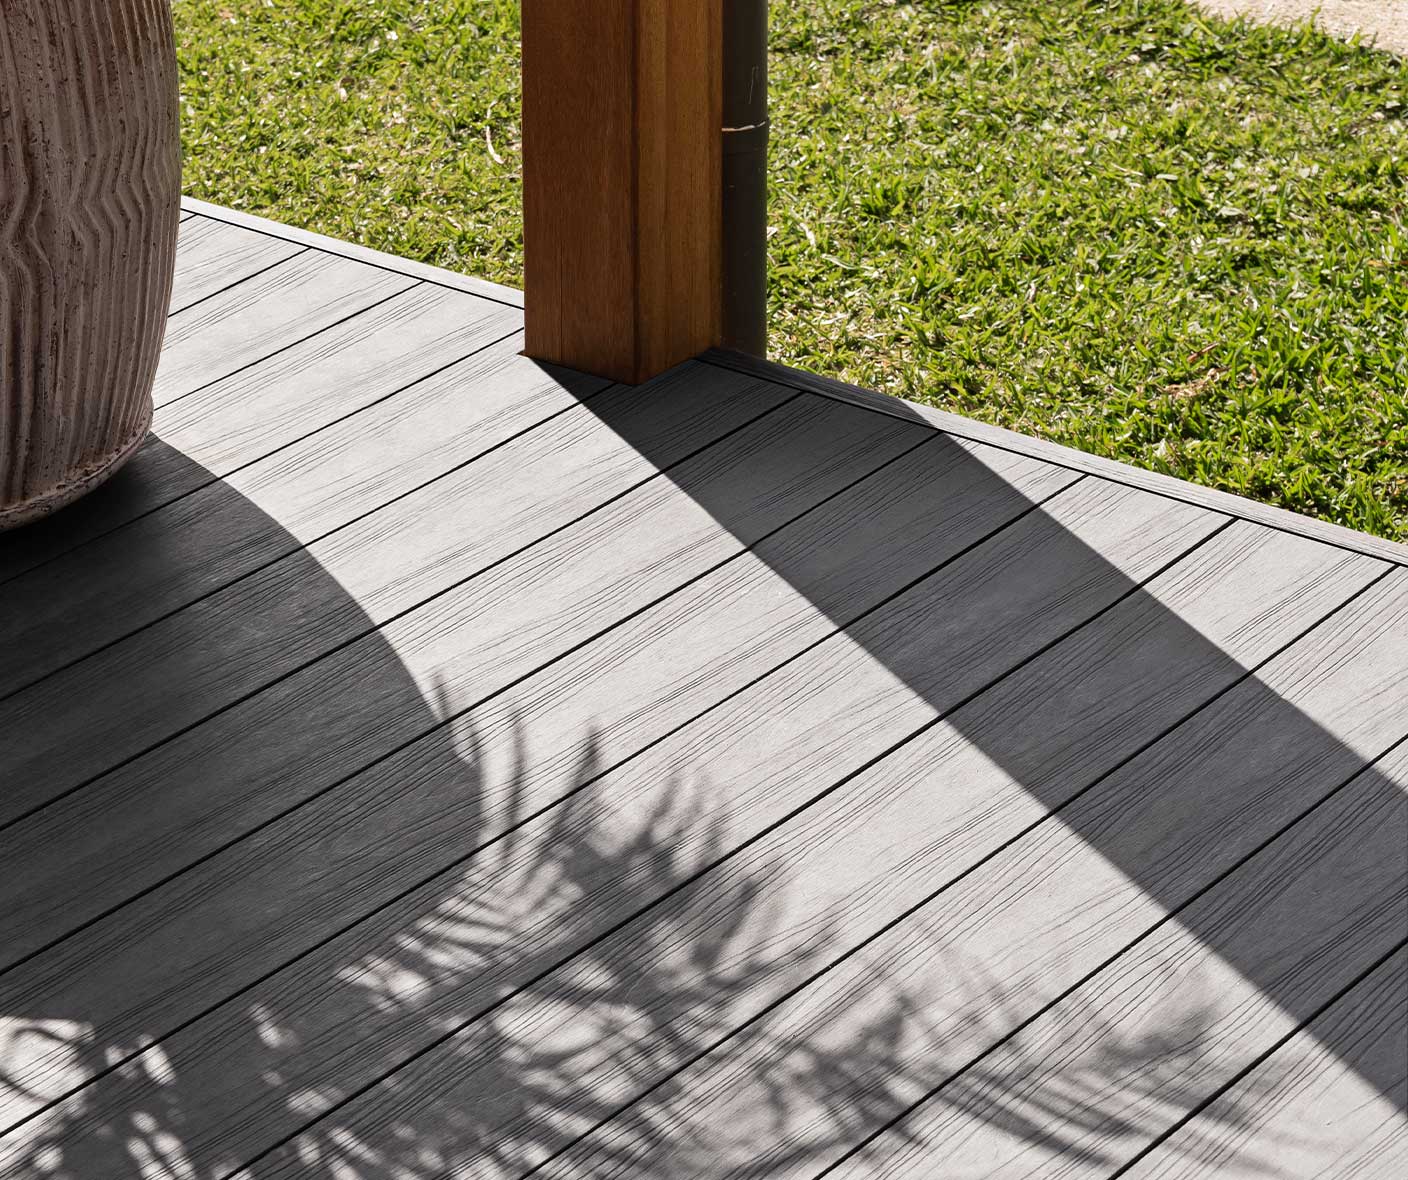 A wooden deck with a potted plant on it, constructed using composite decking.